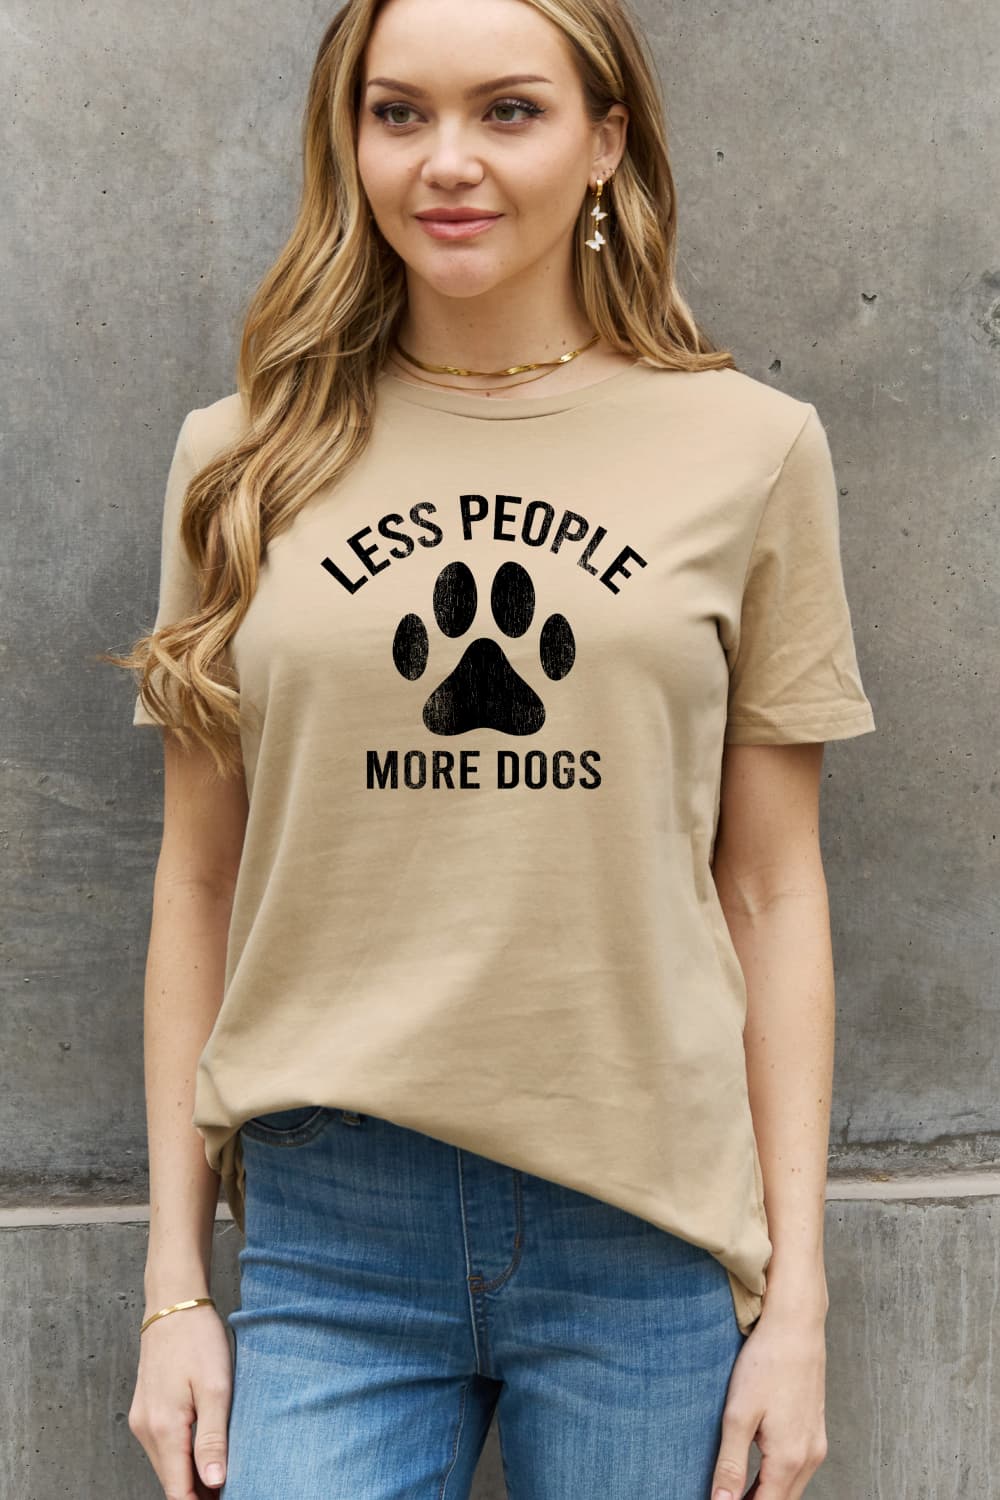 Simply Love Full Size LESS PEOPLE MORE DOGS Graphic Cotton Tee